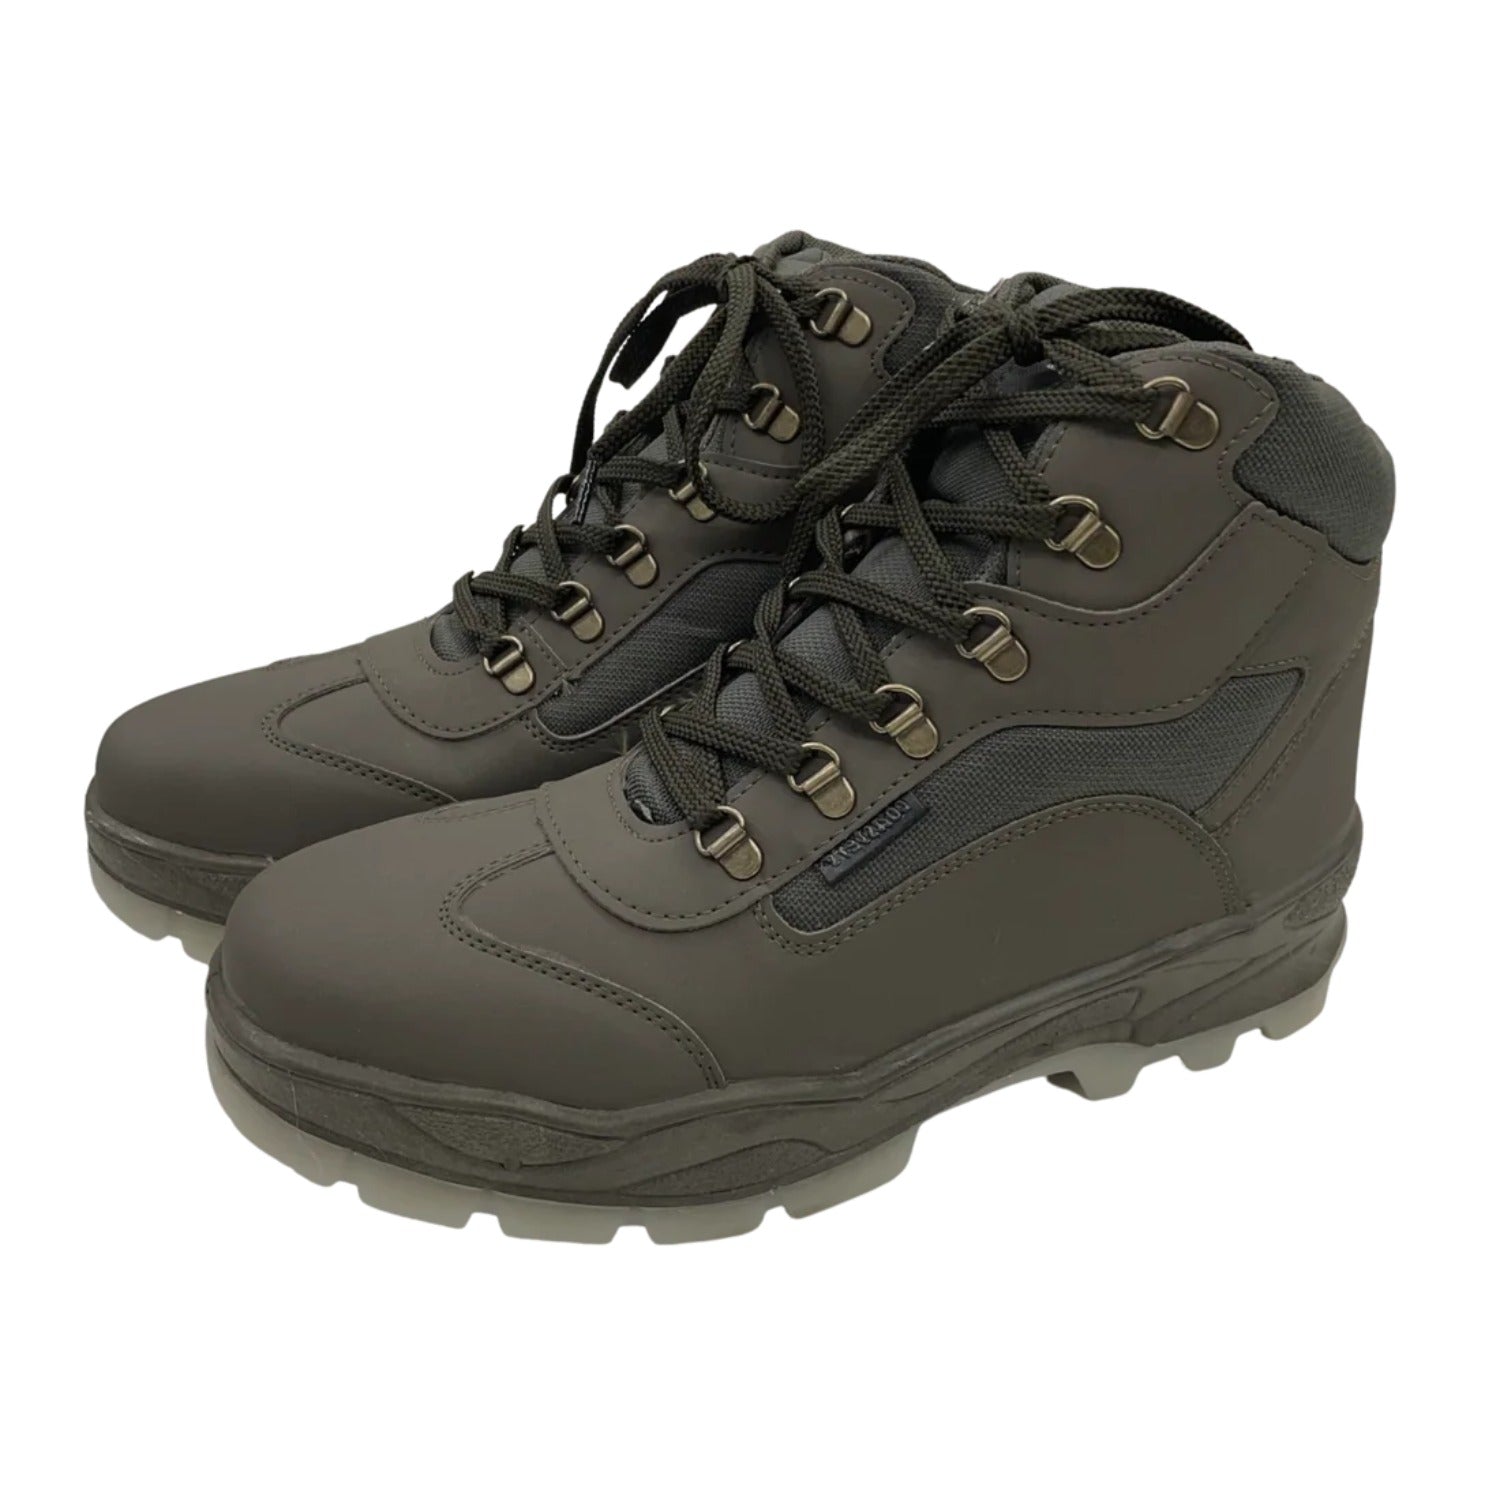 Buy Gokyo Trekking Shoes - Mid Ankle Olive | Trekking & Hiking Shoes at Gokyo Outdoor Clothing & Gear